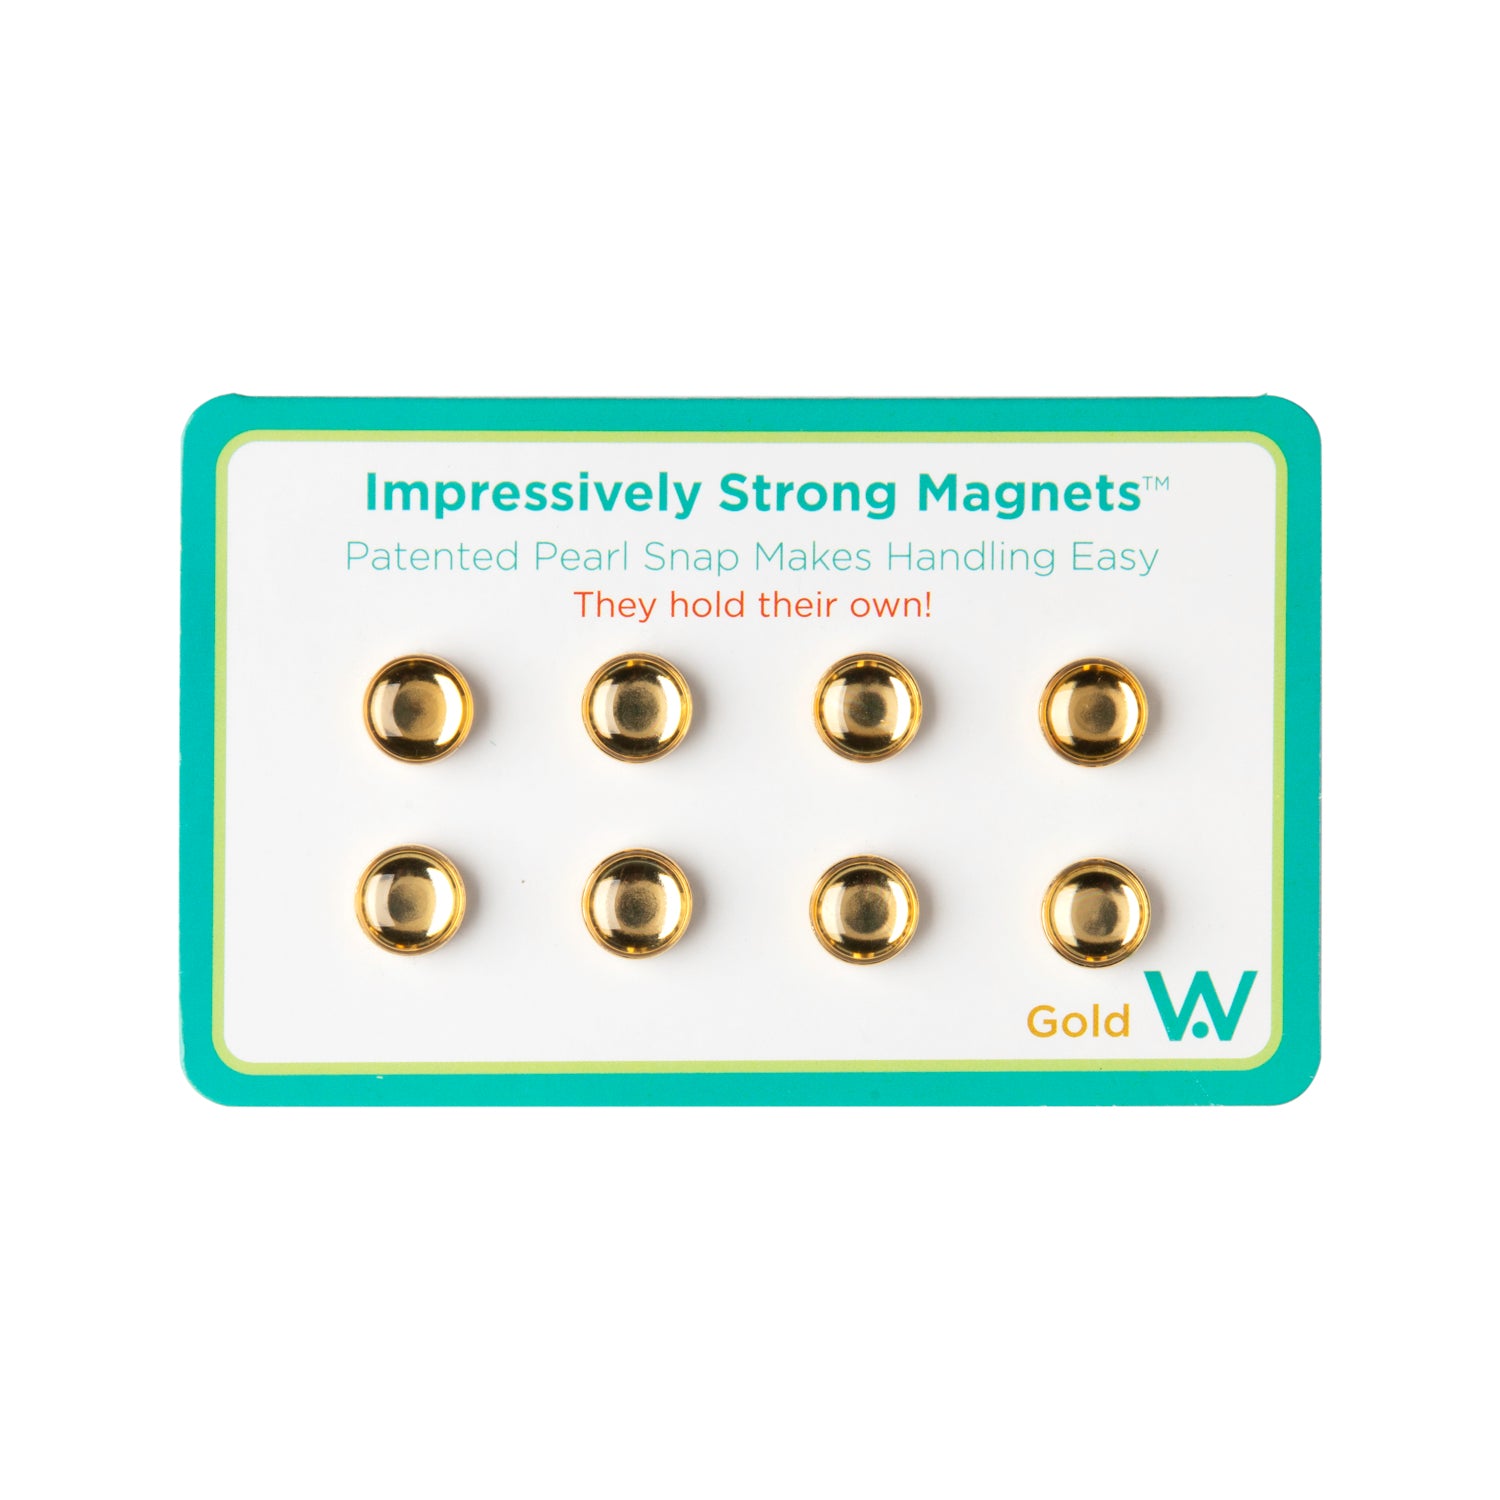 Case Pack of 20 Units of 099 Impressively Strong Magnets Set of 8 (C099)